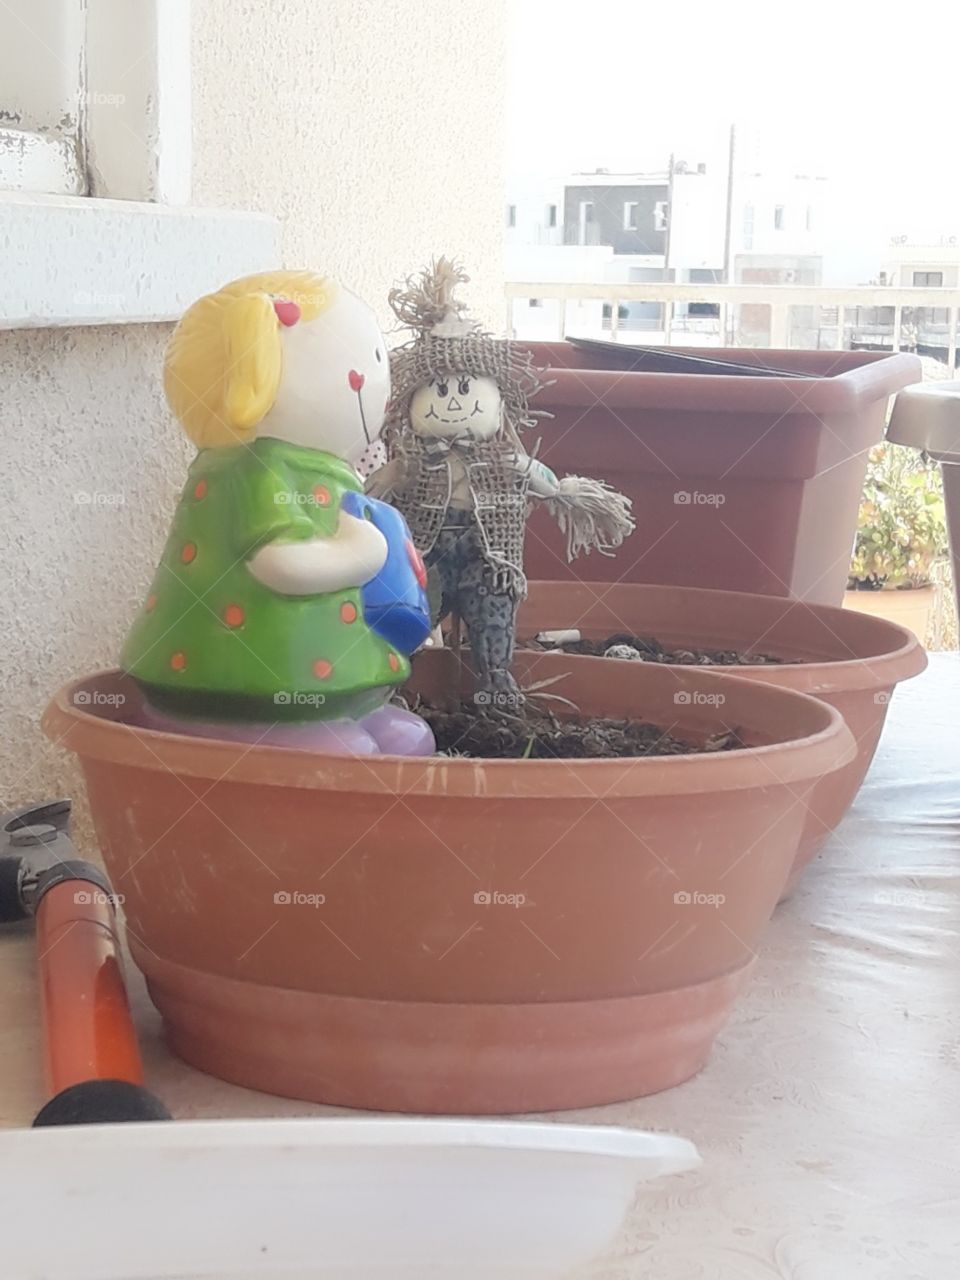 decoration in the pot